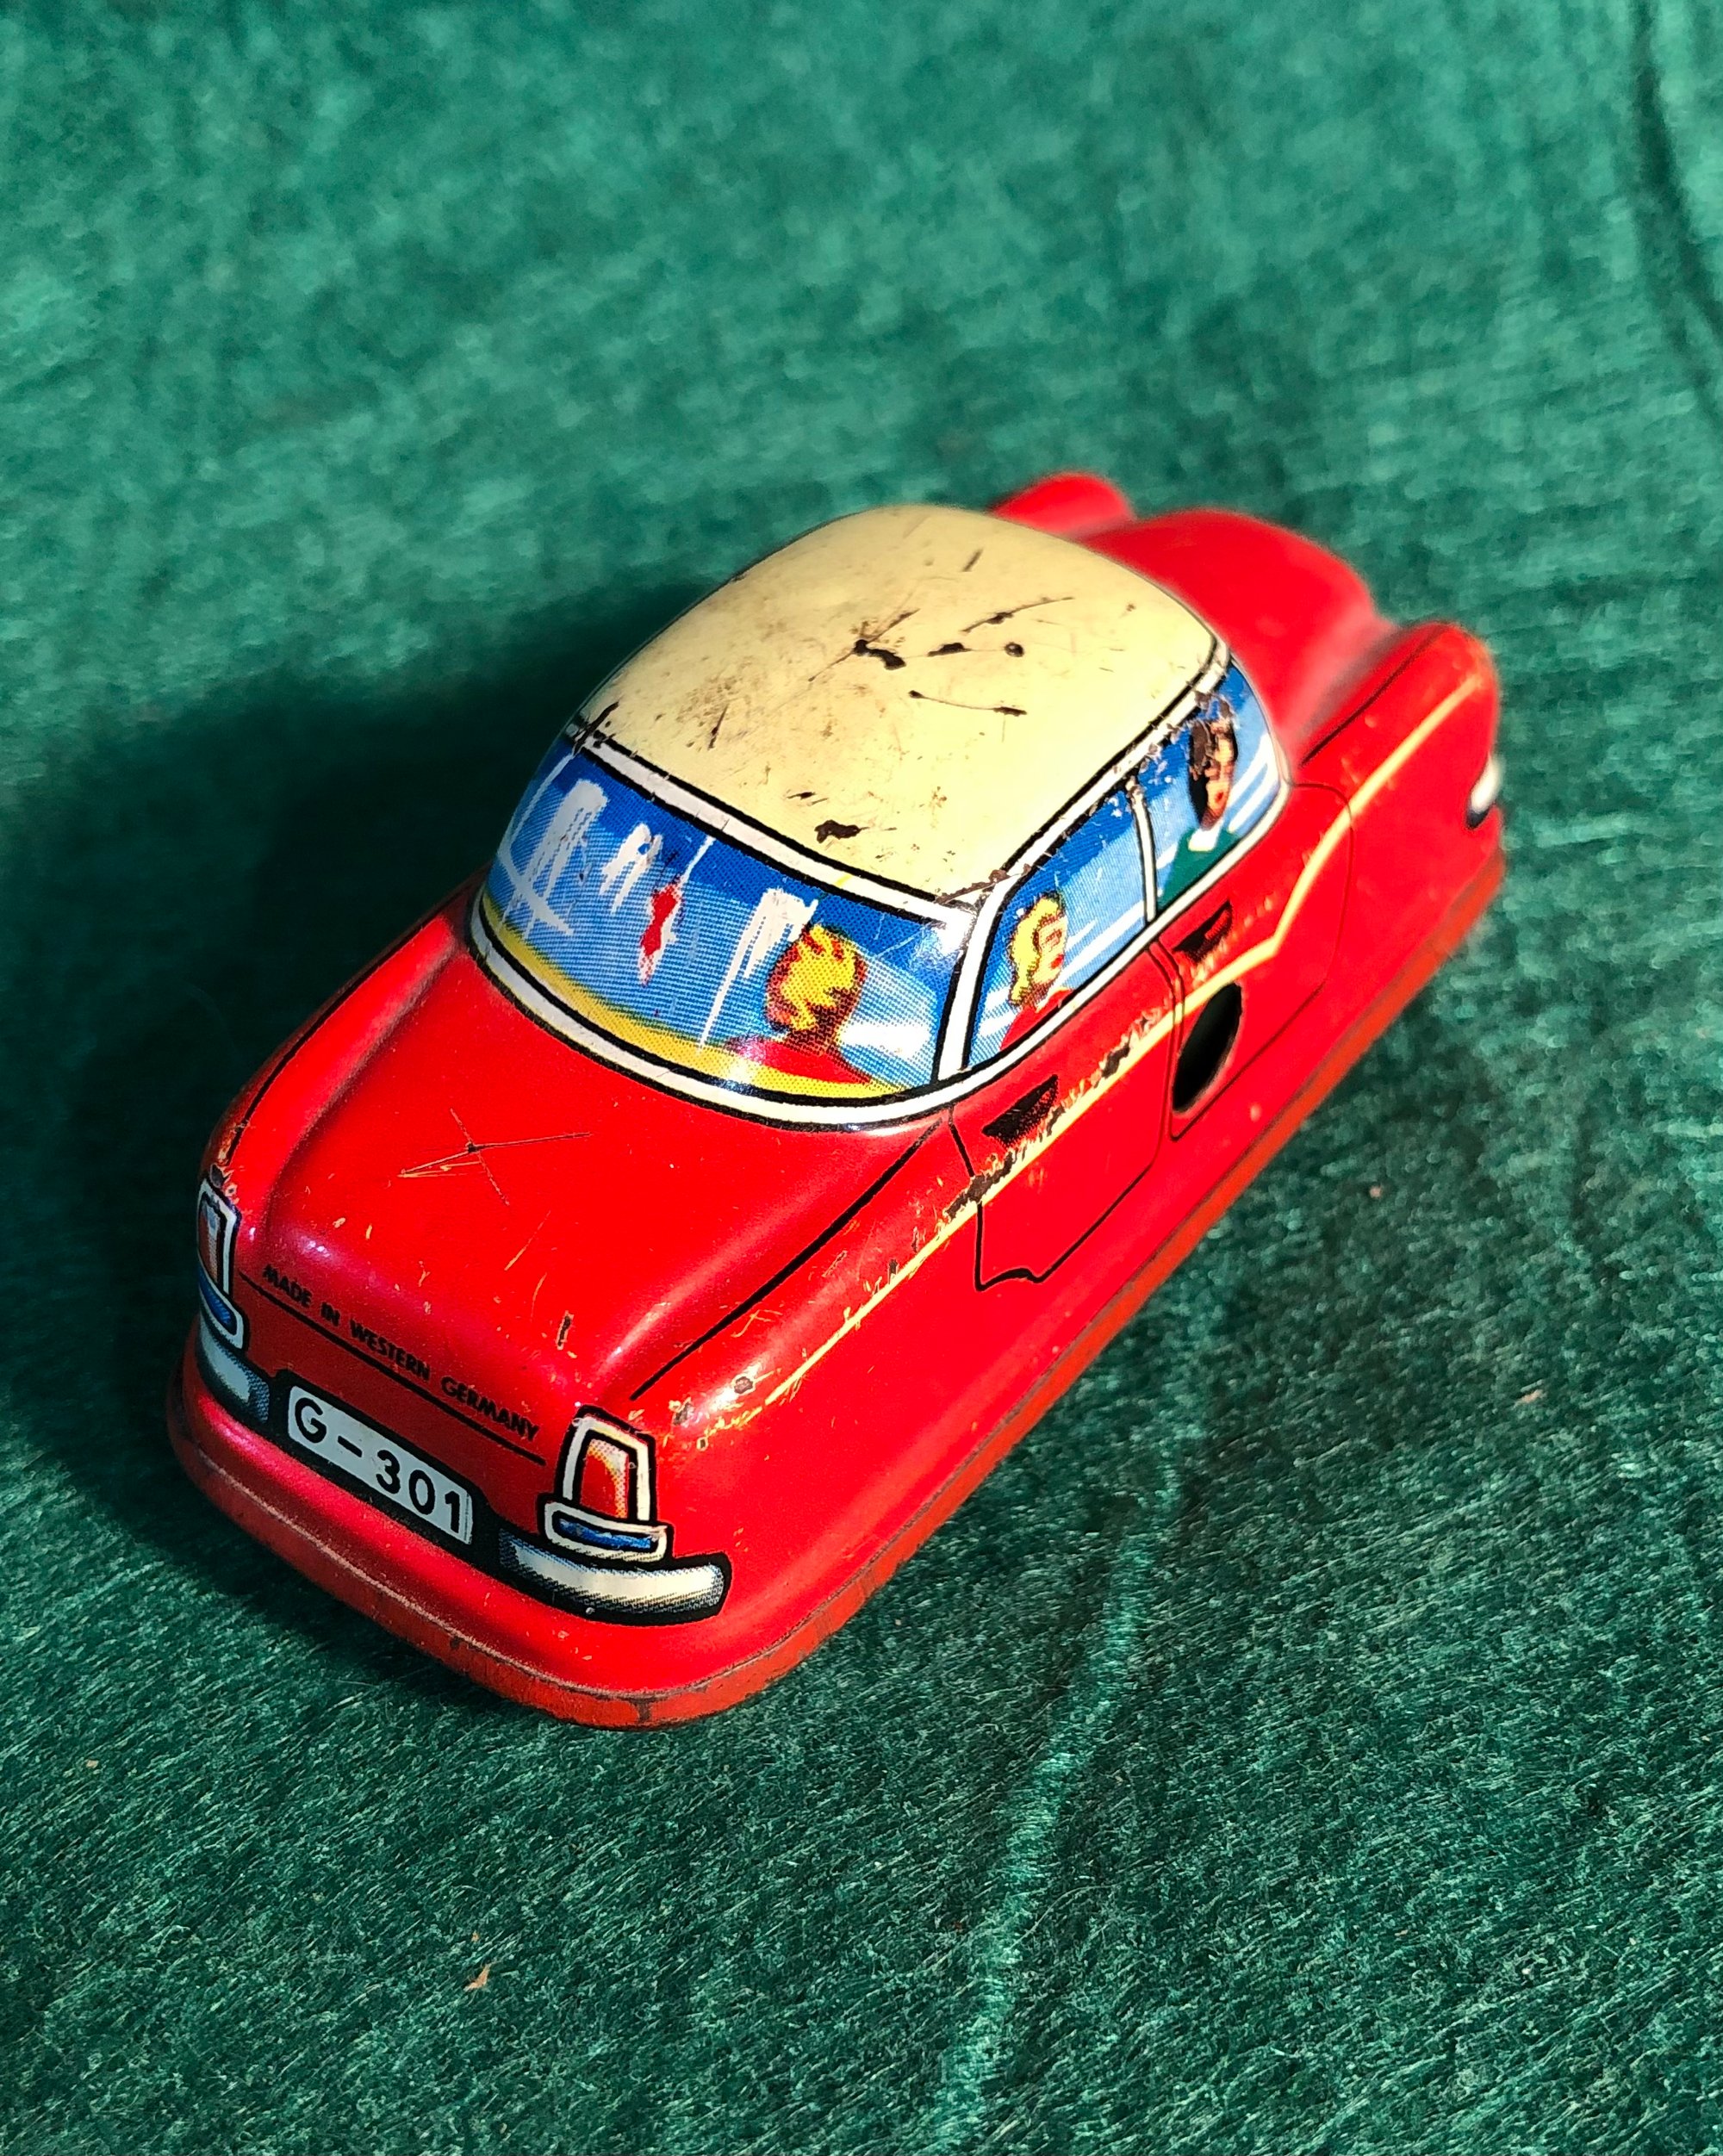 Technofix G-301 Tin Wind Up Car | Collective Soul Creations